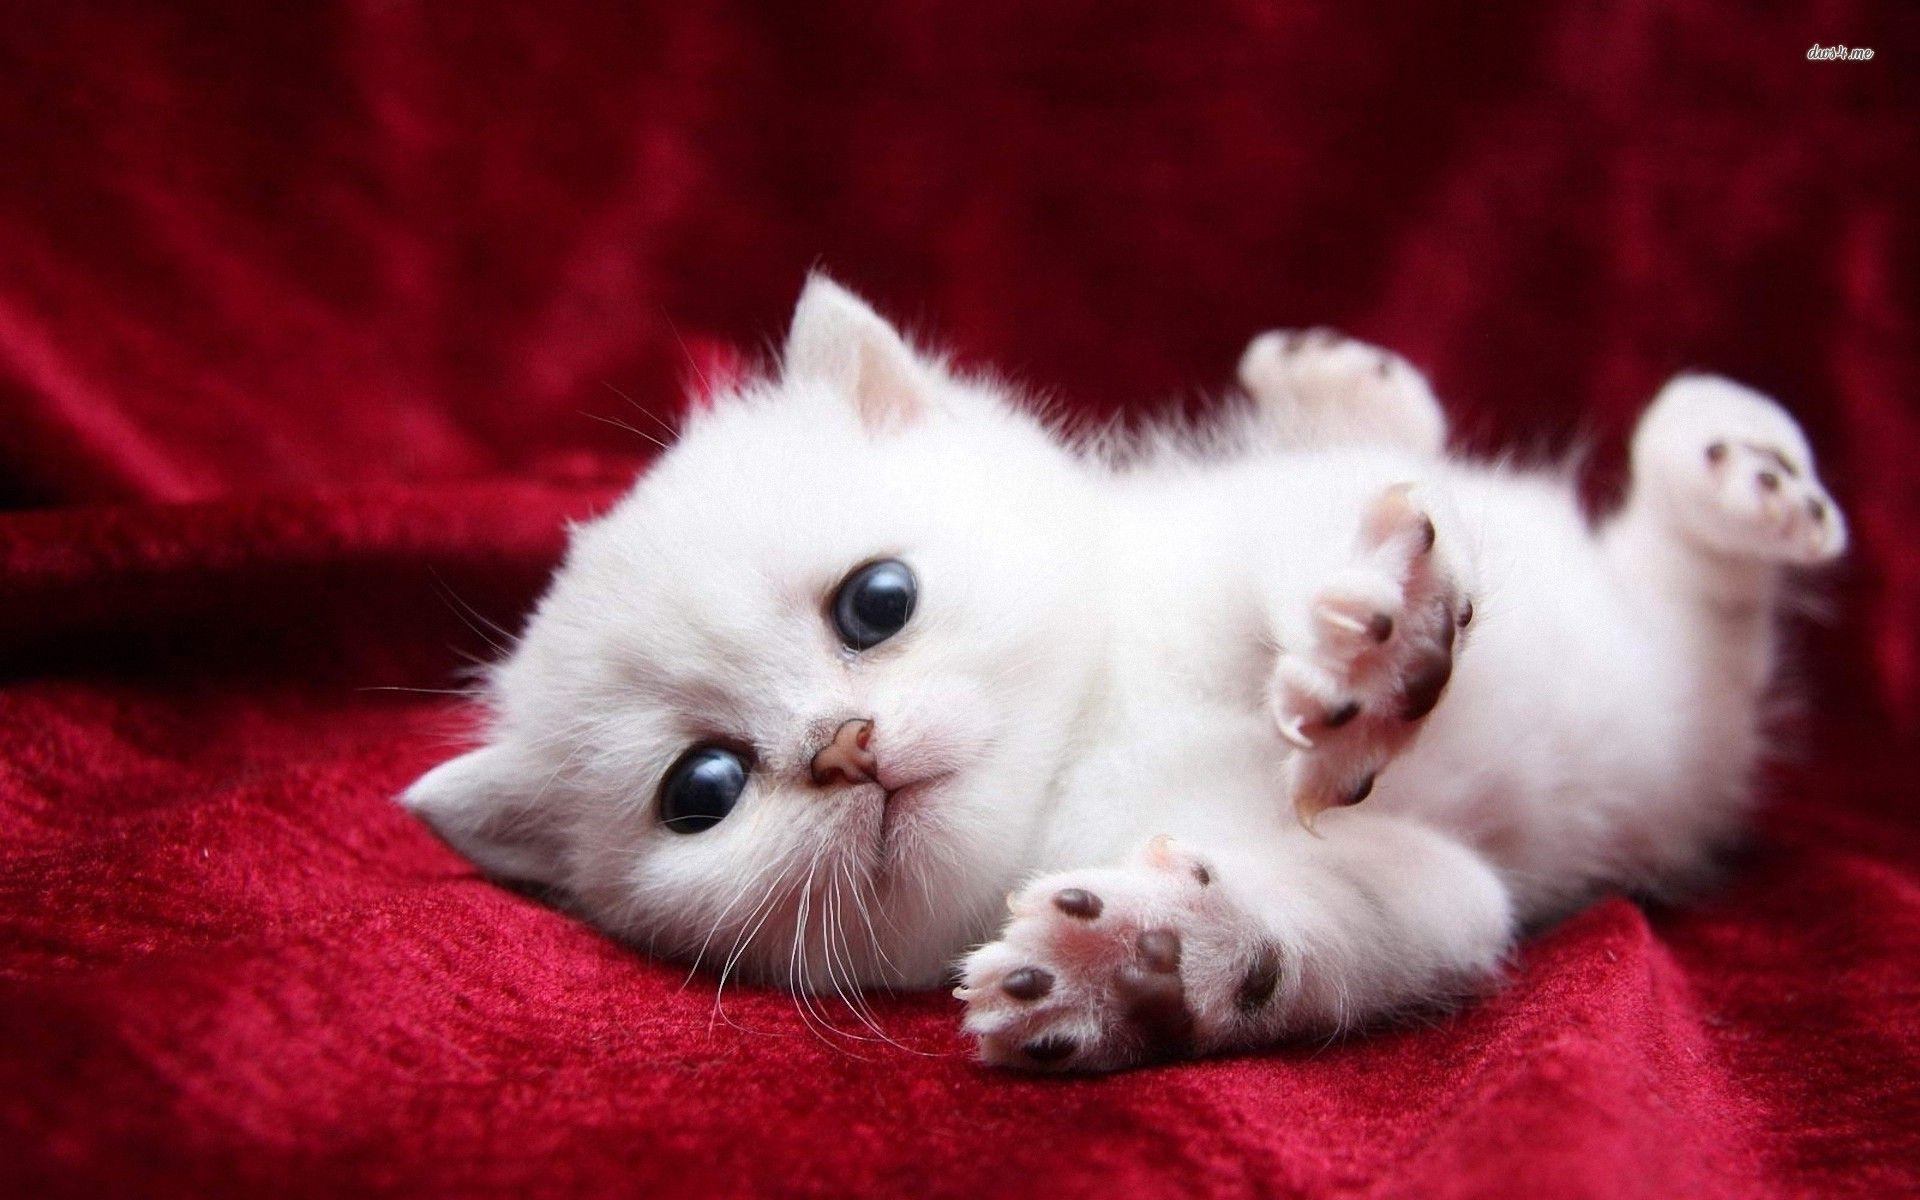 Cute Cats and Kittens Wallpapers - Top